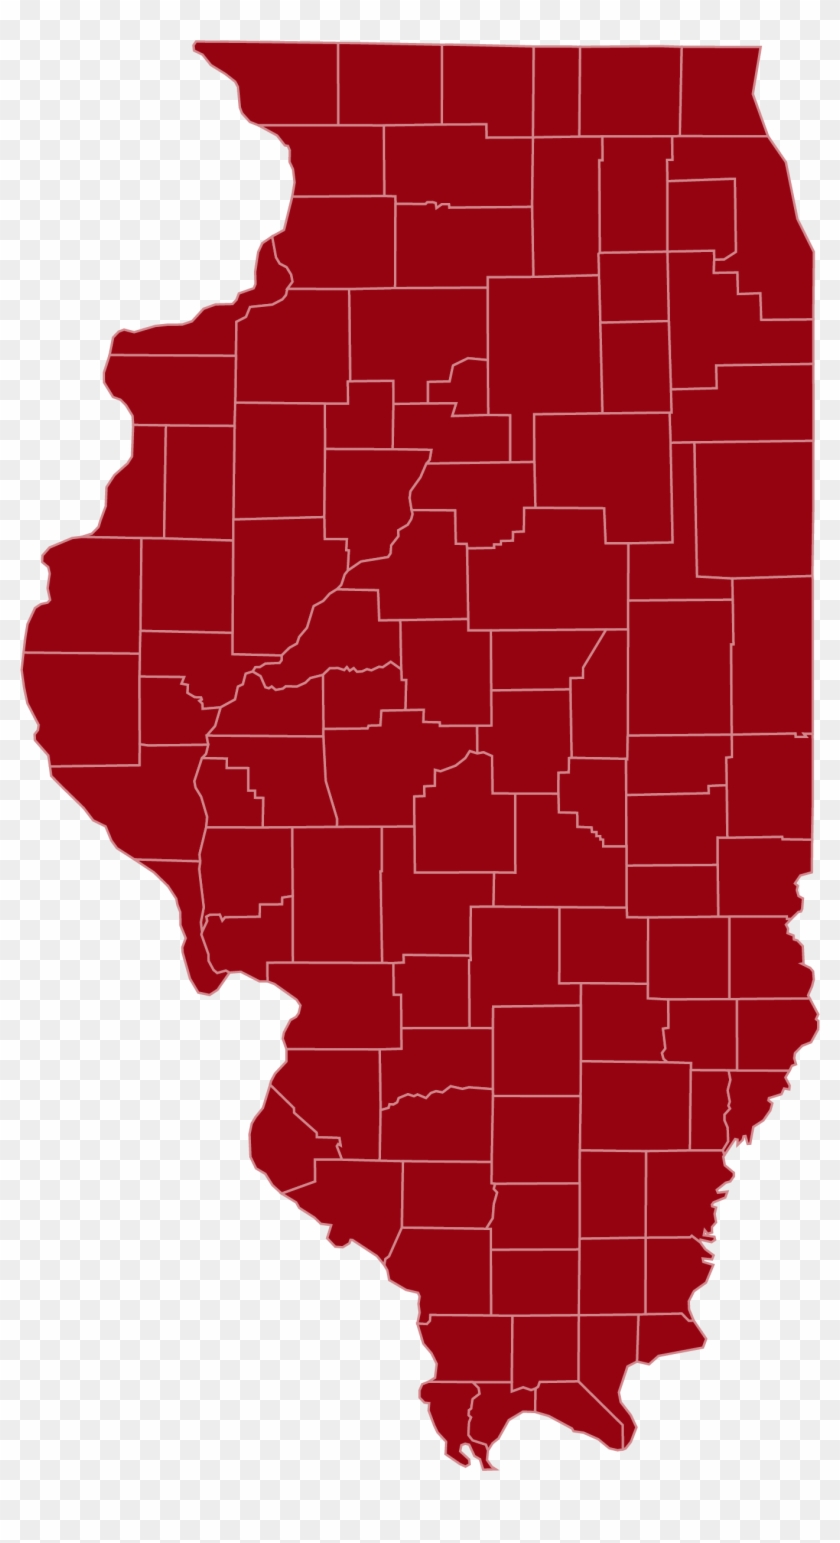 People With Disabilities Are From Every Corner Of Illinois - Illinois Governor Election Map 2018 #1401065